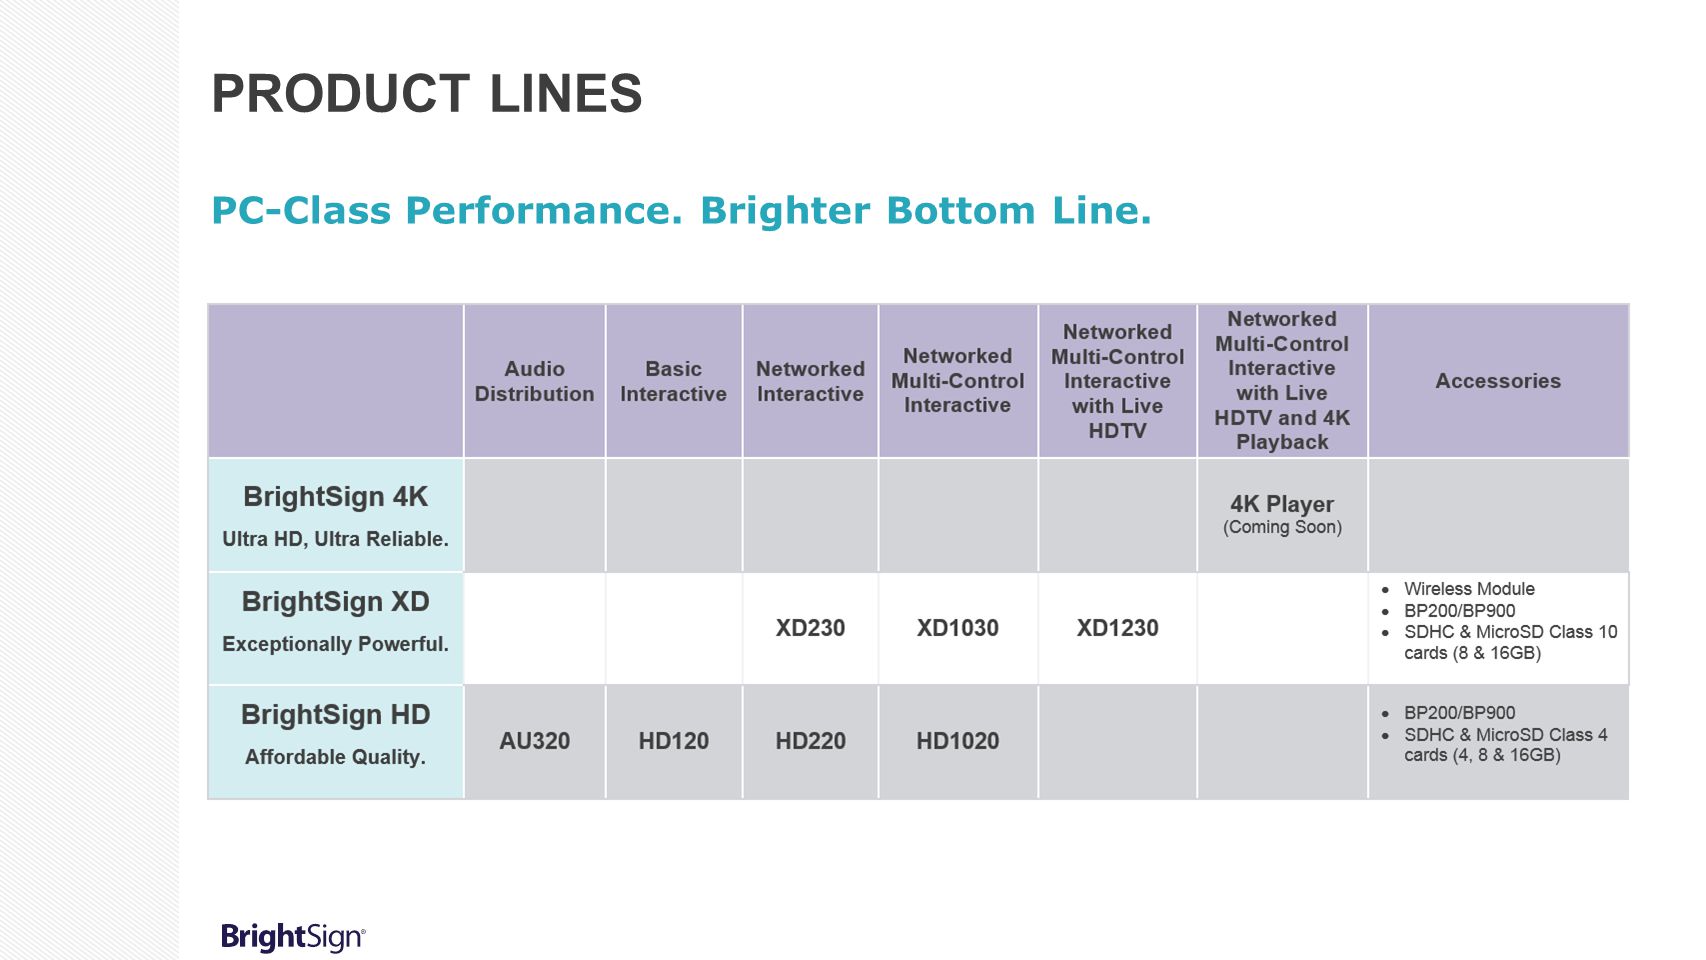 Product lines PC-Class Performance. Brighter Bottom Line.